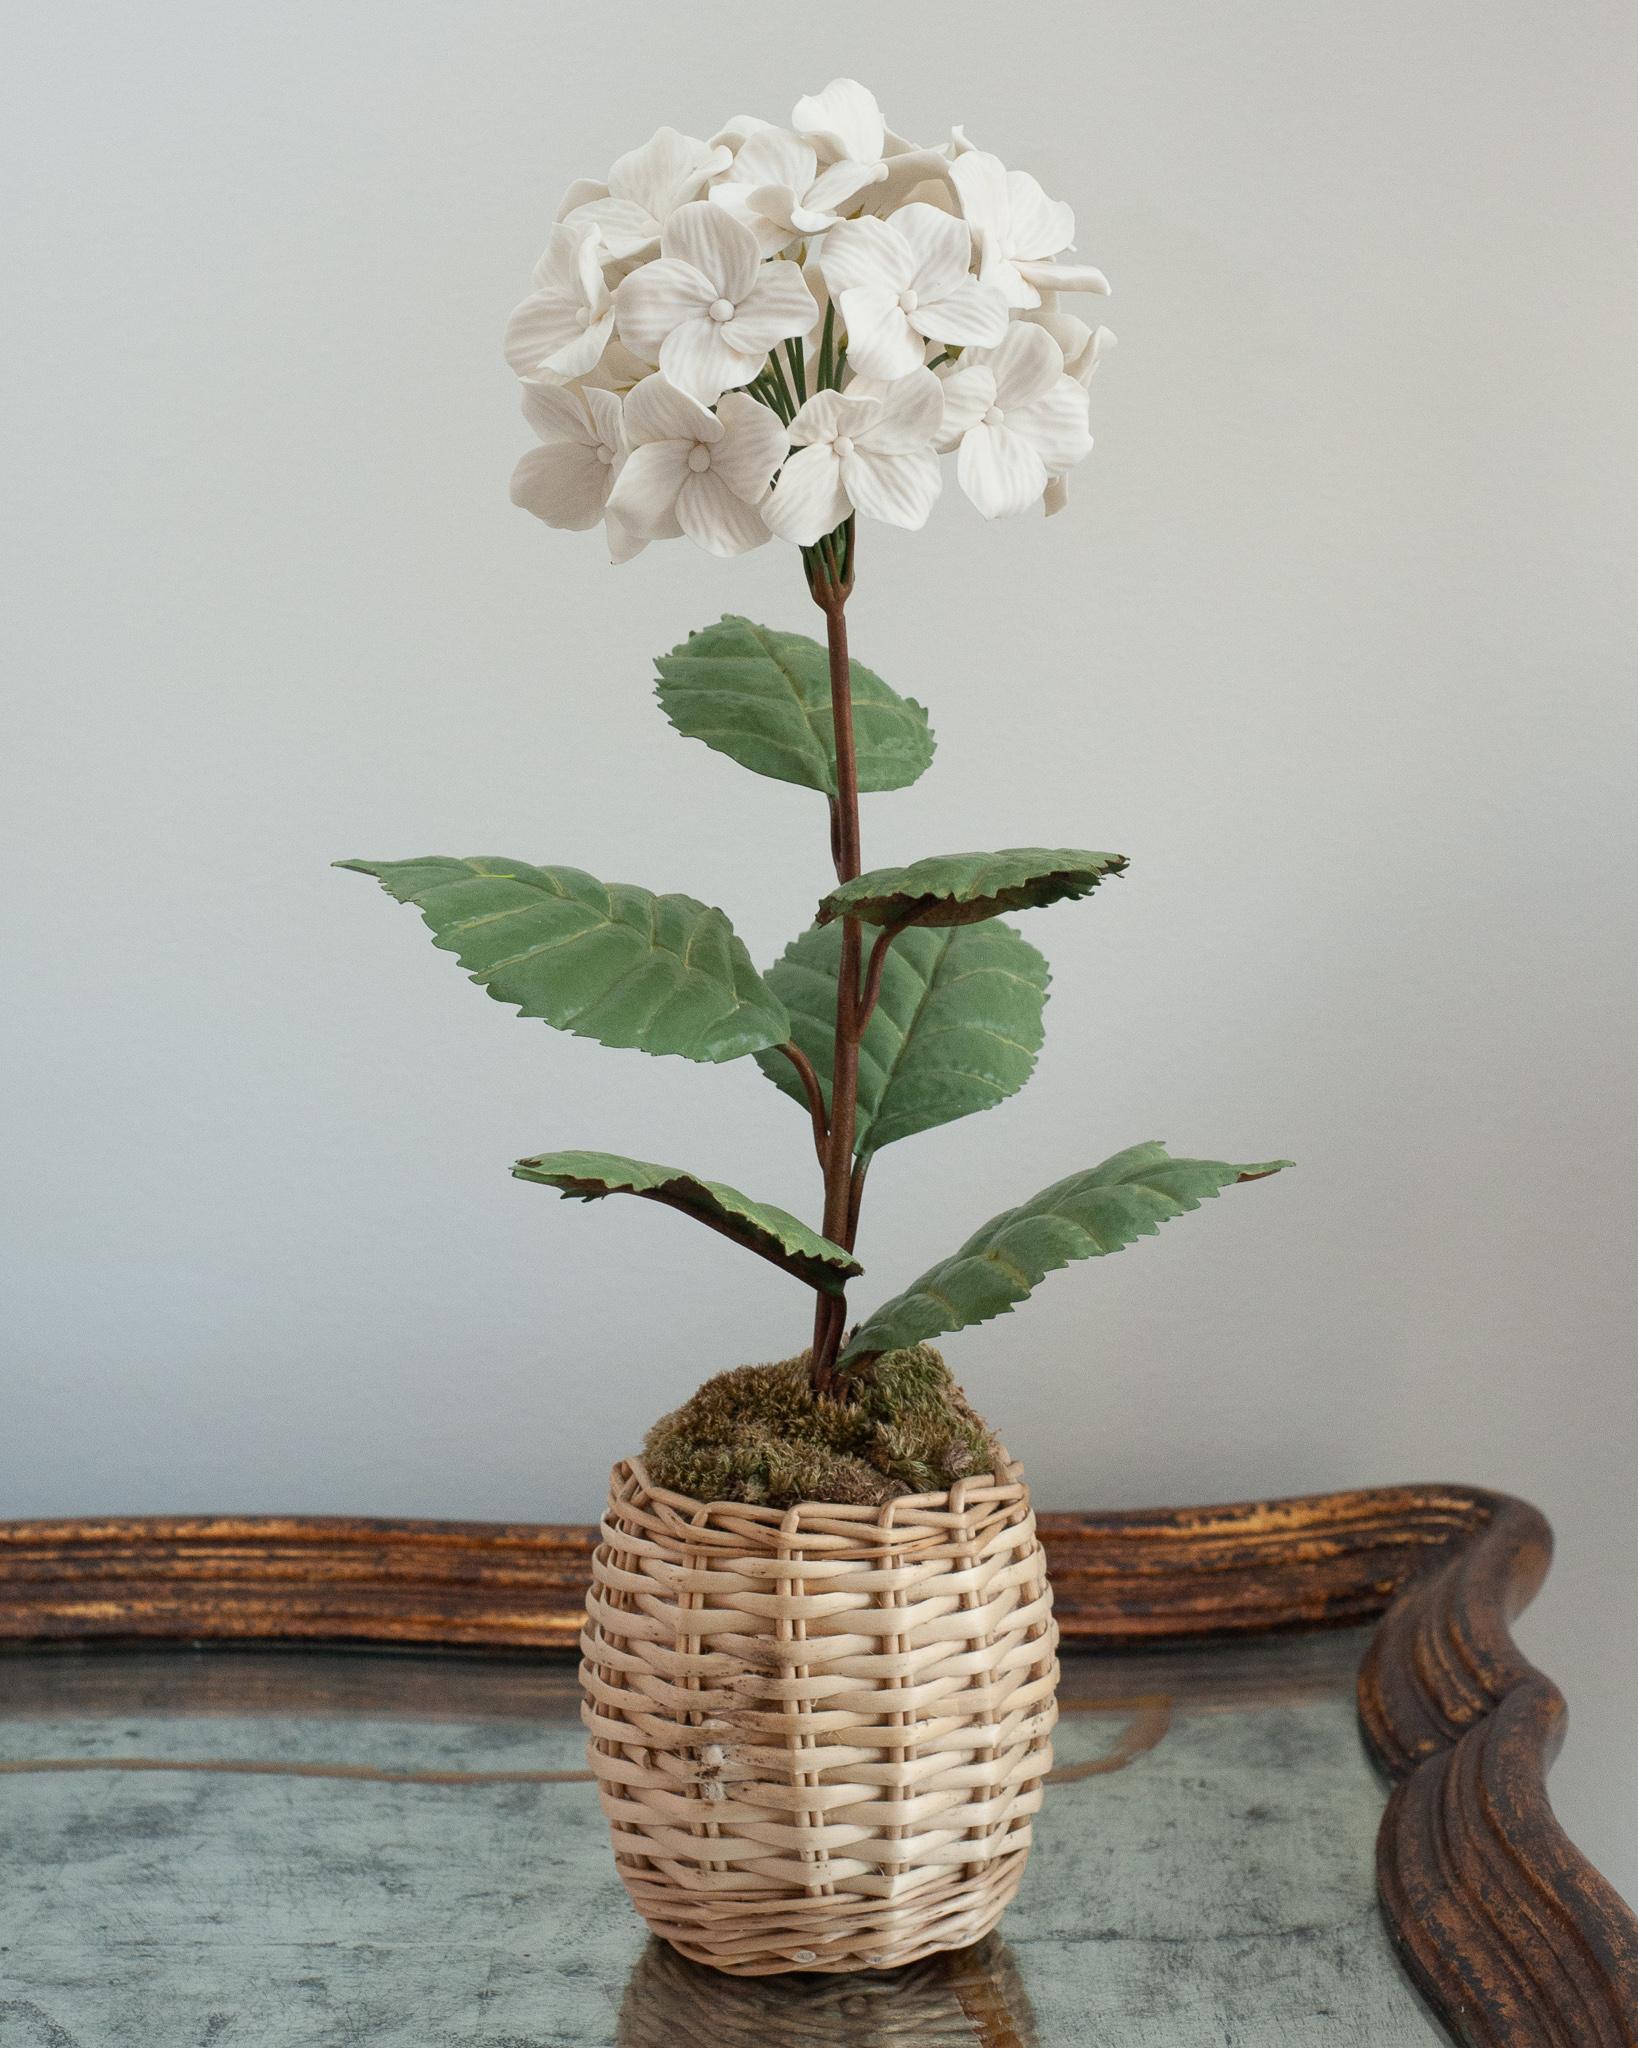 Enhance your table with these delicate porcelain flowers by French artist Samuel Mazy. This white hydrangea is handmade in biscuit porcelain, with handpainted copper leaves and stems, and is placed in a wicker pot. 
An exclusive floral collection